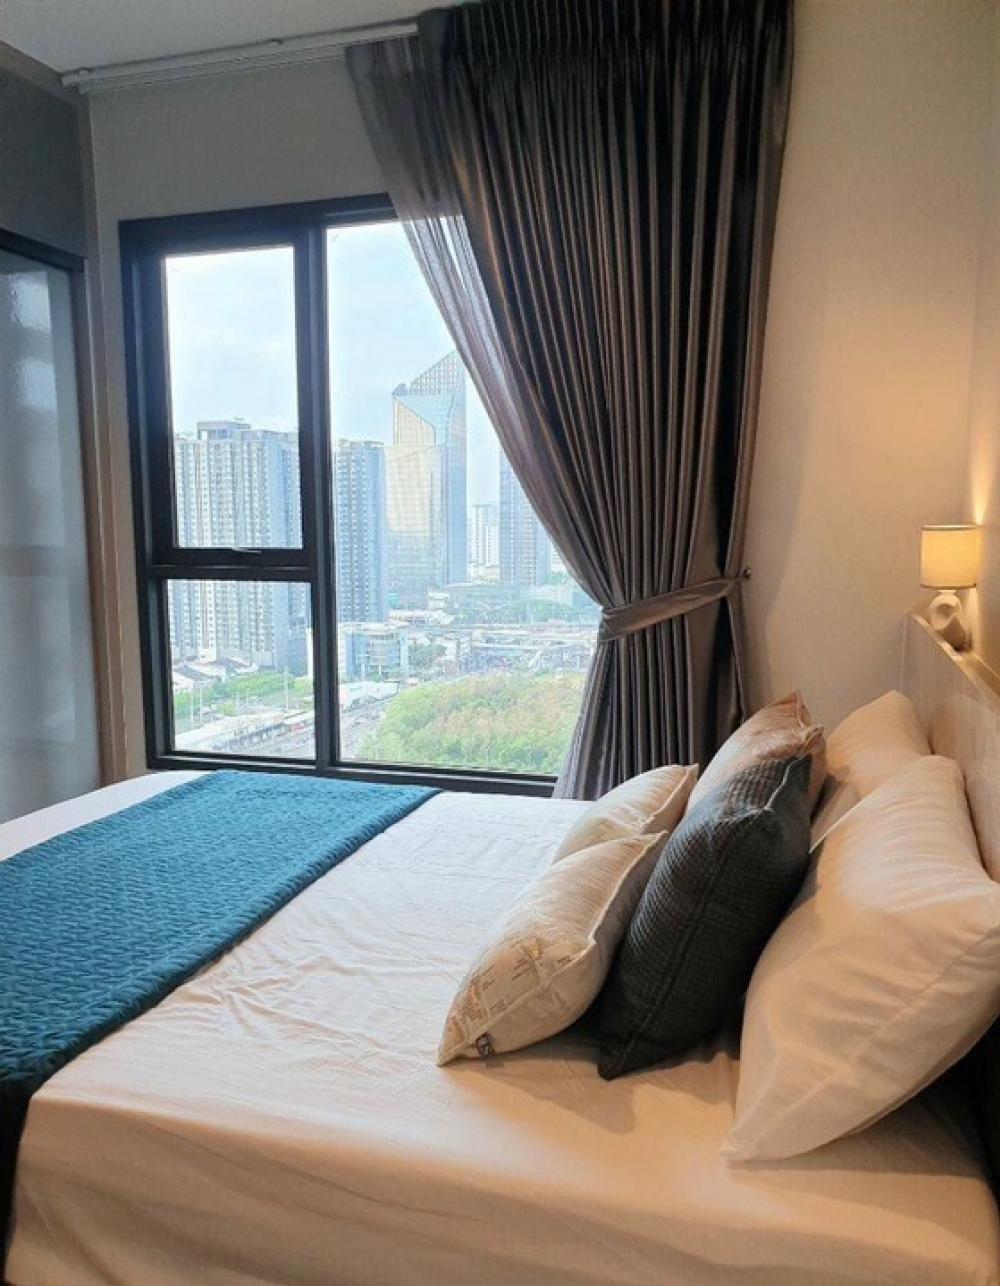 For RentCondoRama9, Petchburi, RCA : For rent, LIFE Asoke - Rama 9 (Life Asoke - Rama 9), interested in details. You can make an appointment to see the room. #Add Line, reply very quickly. Add Line: Line ID: @780usfzn (with @ too), code LAR9.5